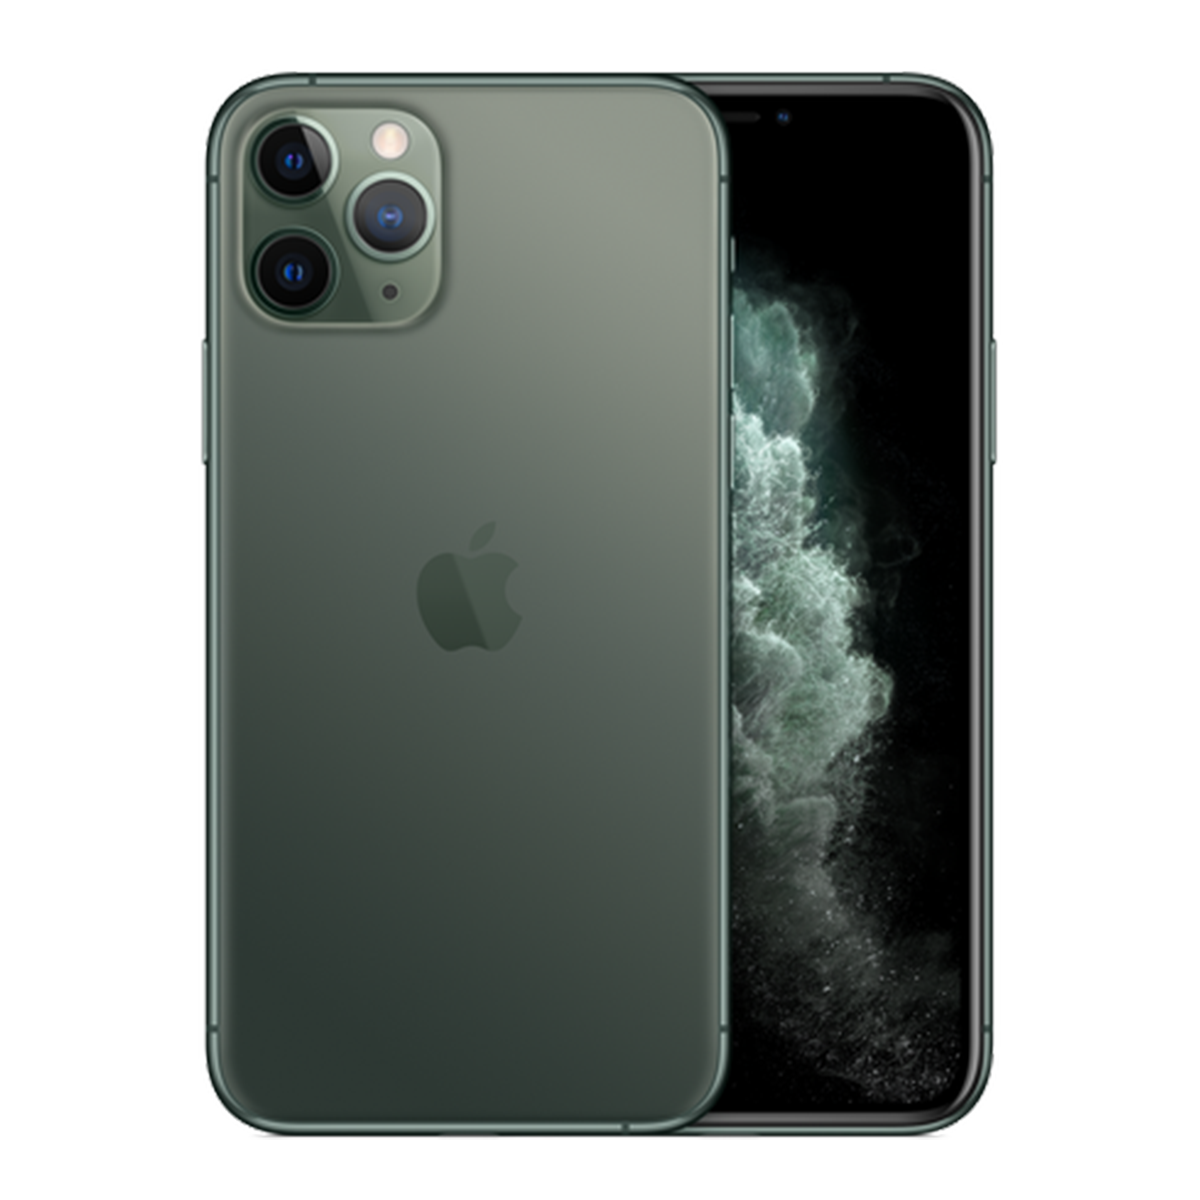 iPhone 11 Pro, Midnight Green, 256GB (Official Stock)